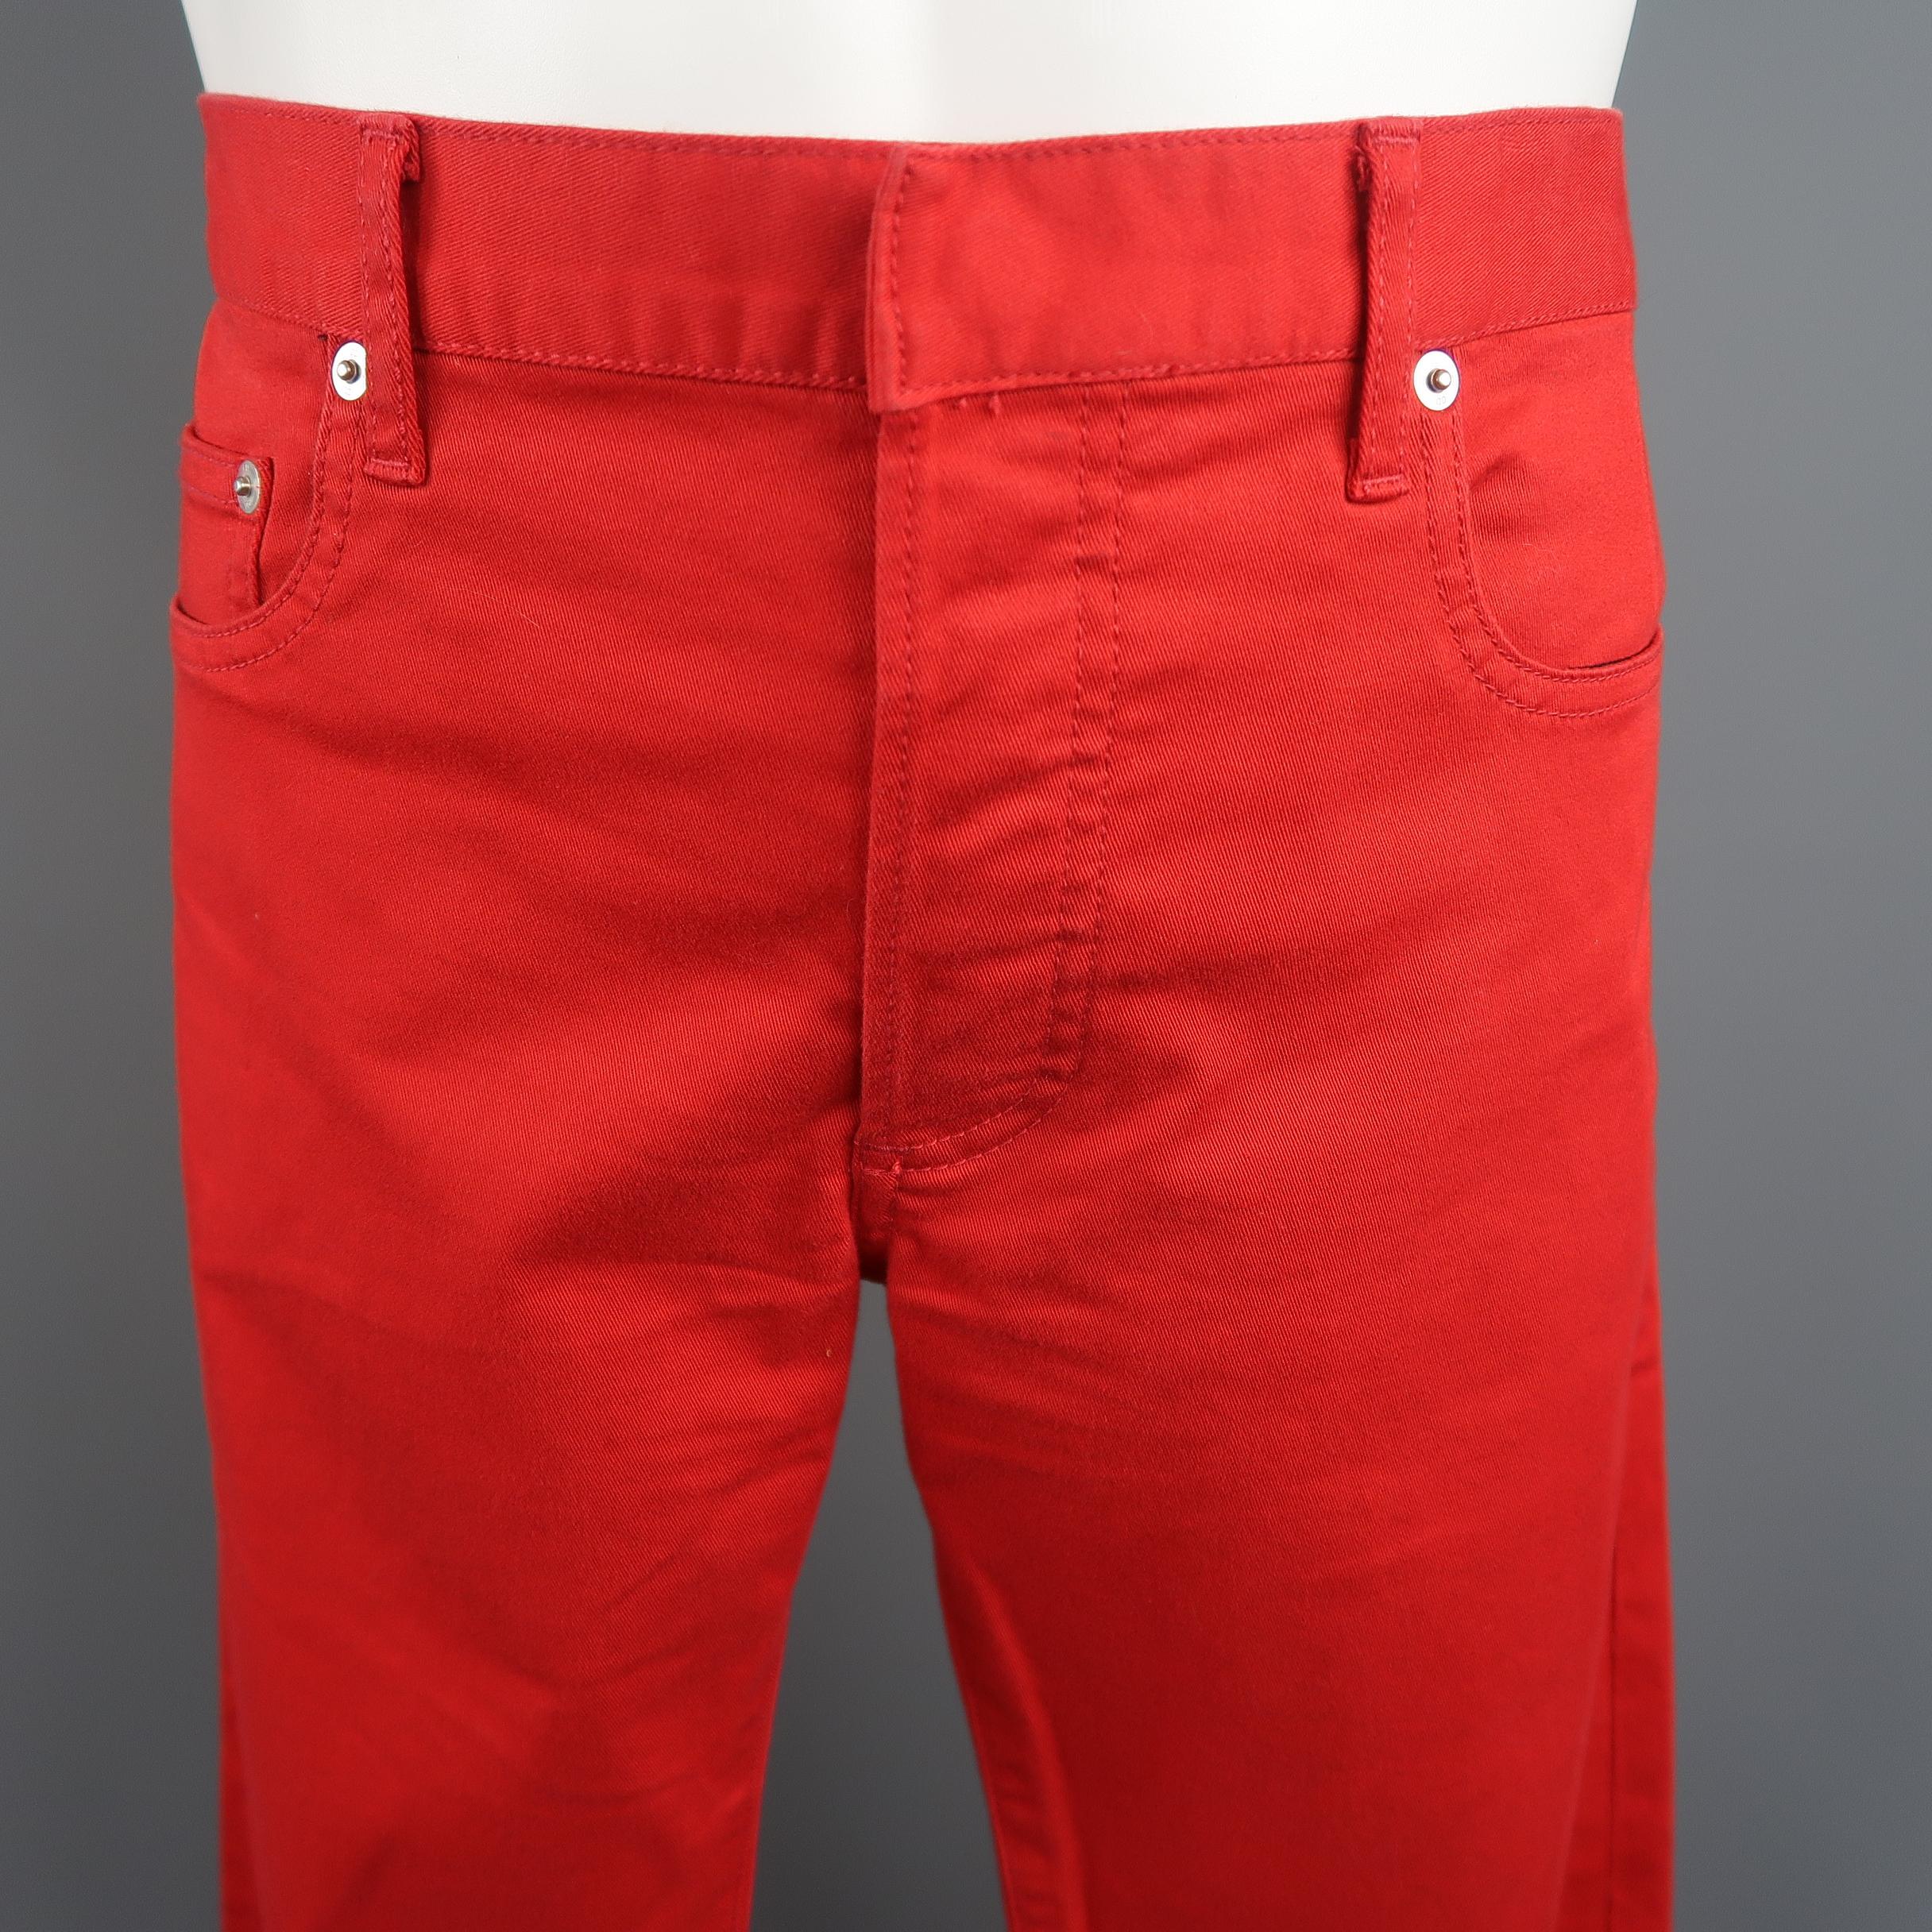 Dior Homme Jeans come in red solid cotton blend denim with a silver tone logo detail and button fly closure. Made in Japan.
 
Excellent Pre-Owned Condition.
Marked: 32
 
Measurements:
 
Waist: 36 in.
Rise: 9 in.
Inseam: 29 in.